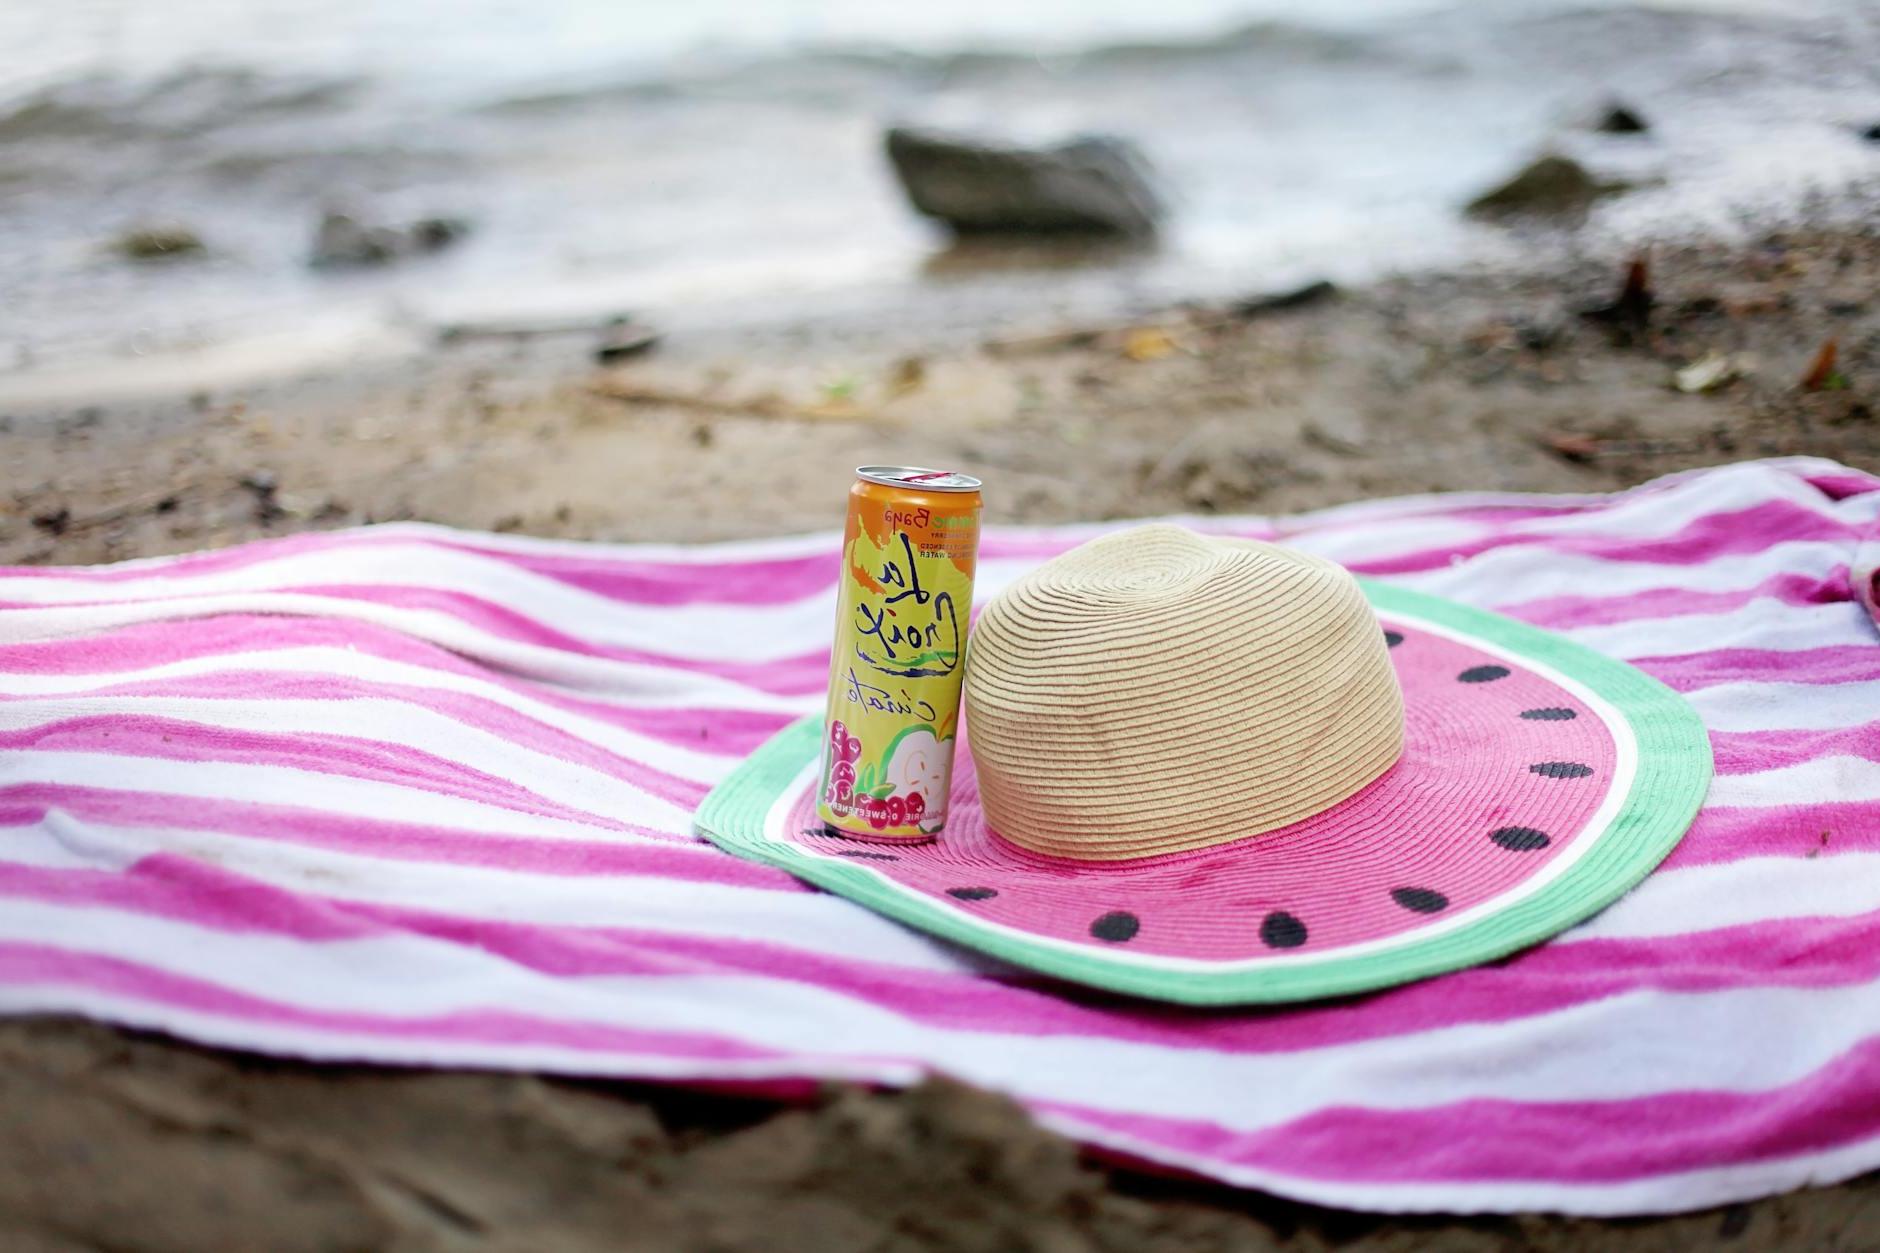 Striped towel spread on sandy beach with straw hat and juice can